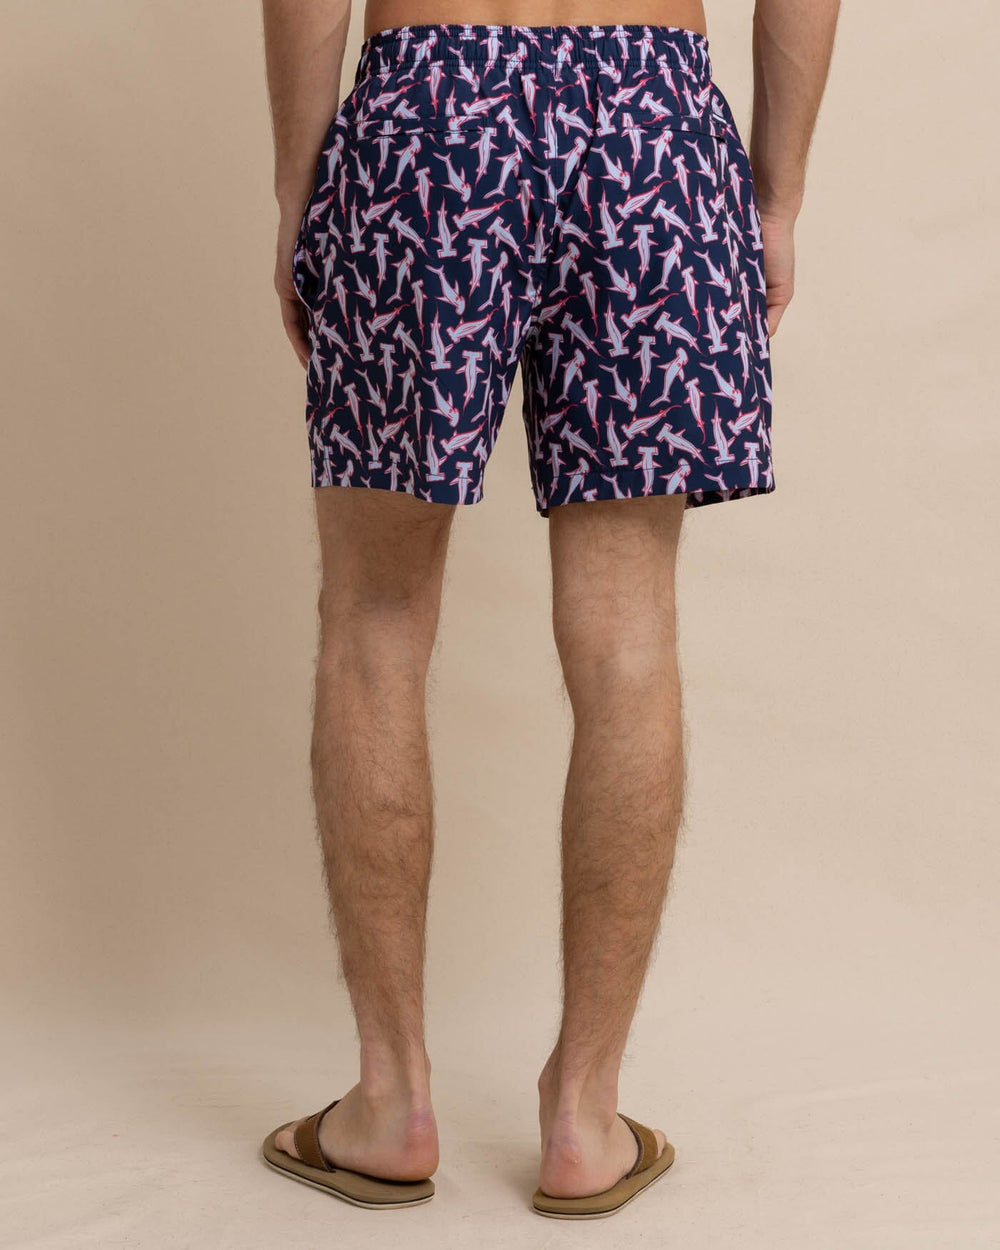 The back view of the Southern Tide Nailed It Swim Trunk by Southern Tide - Dress Blue